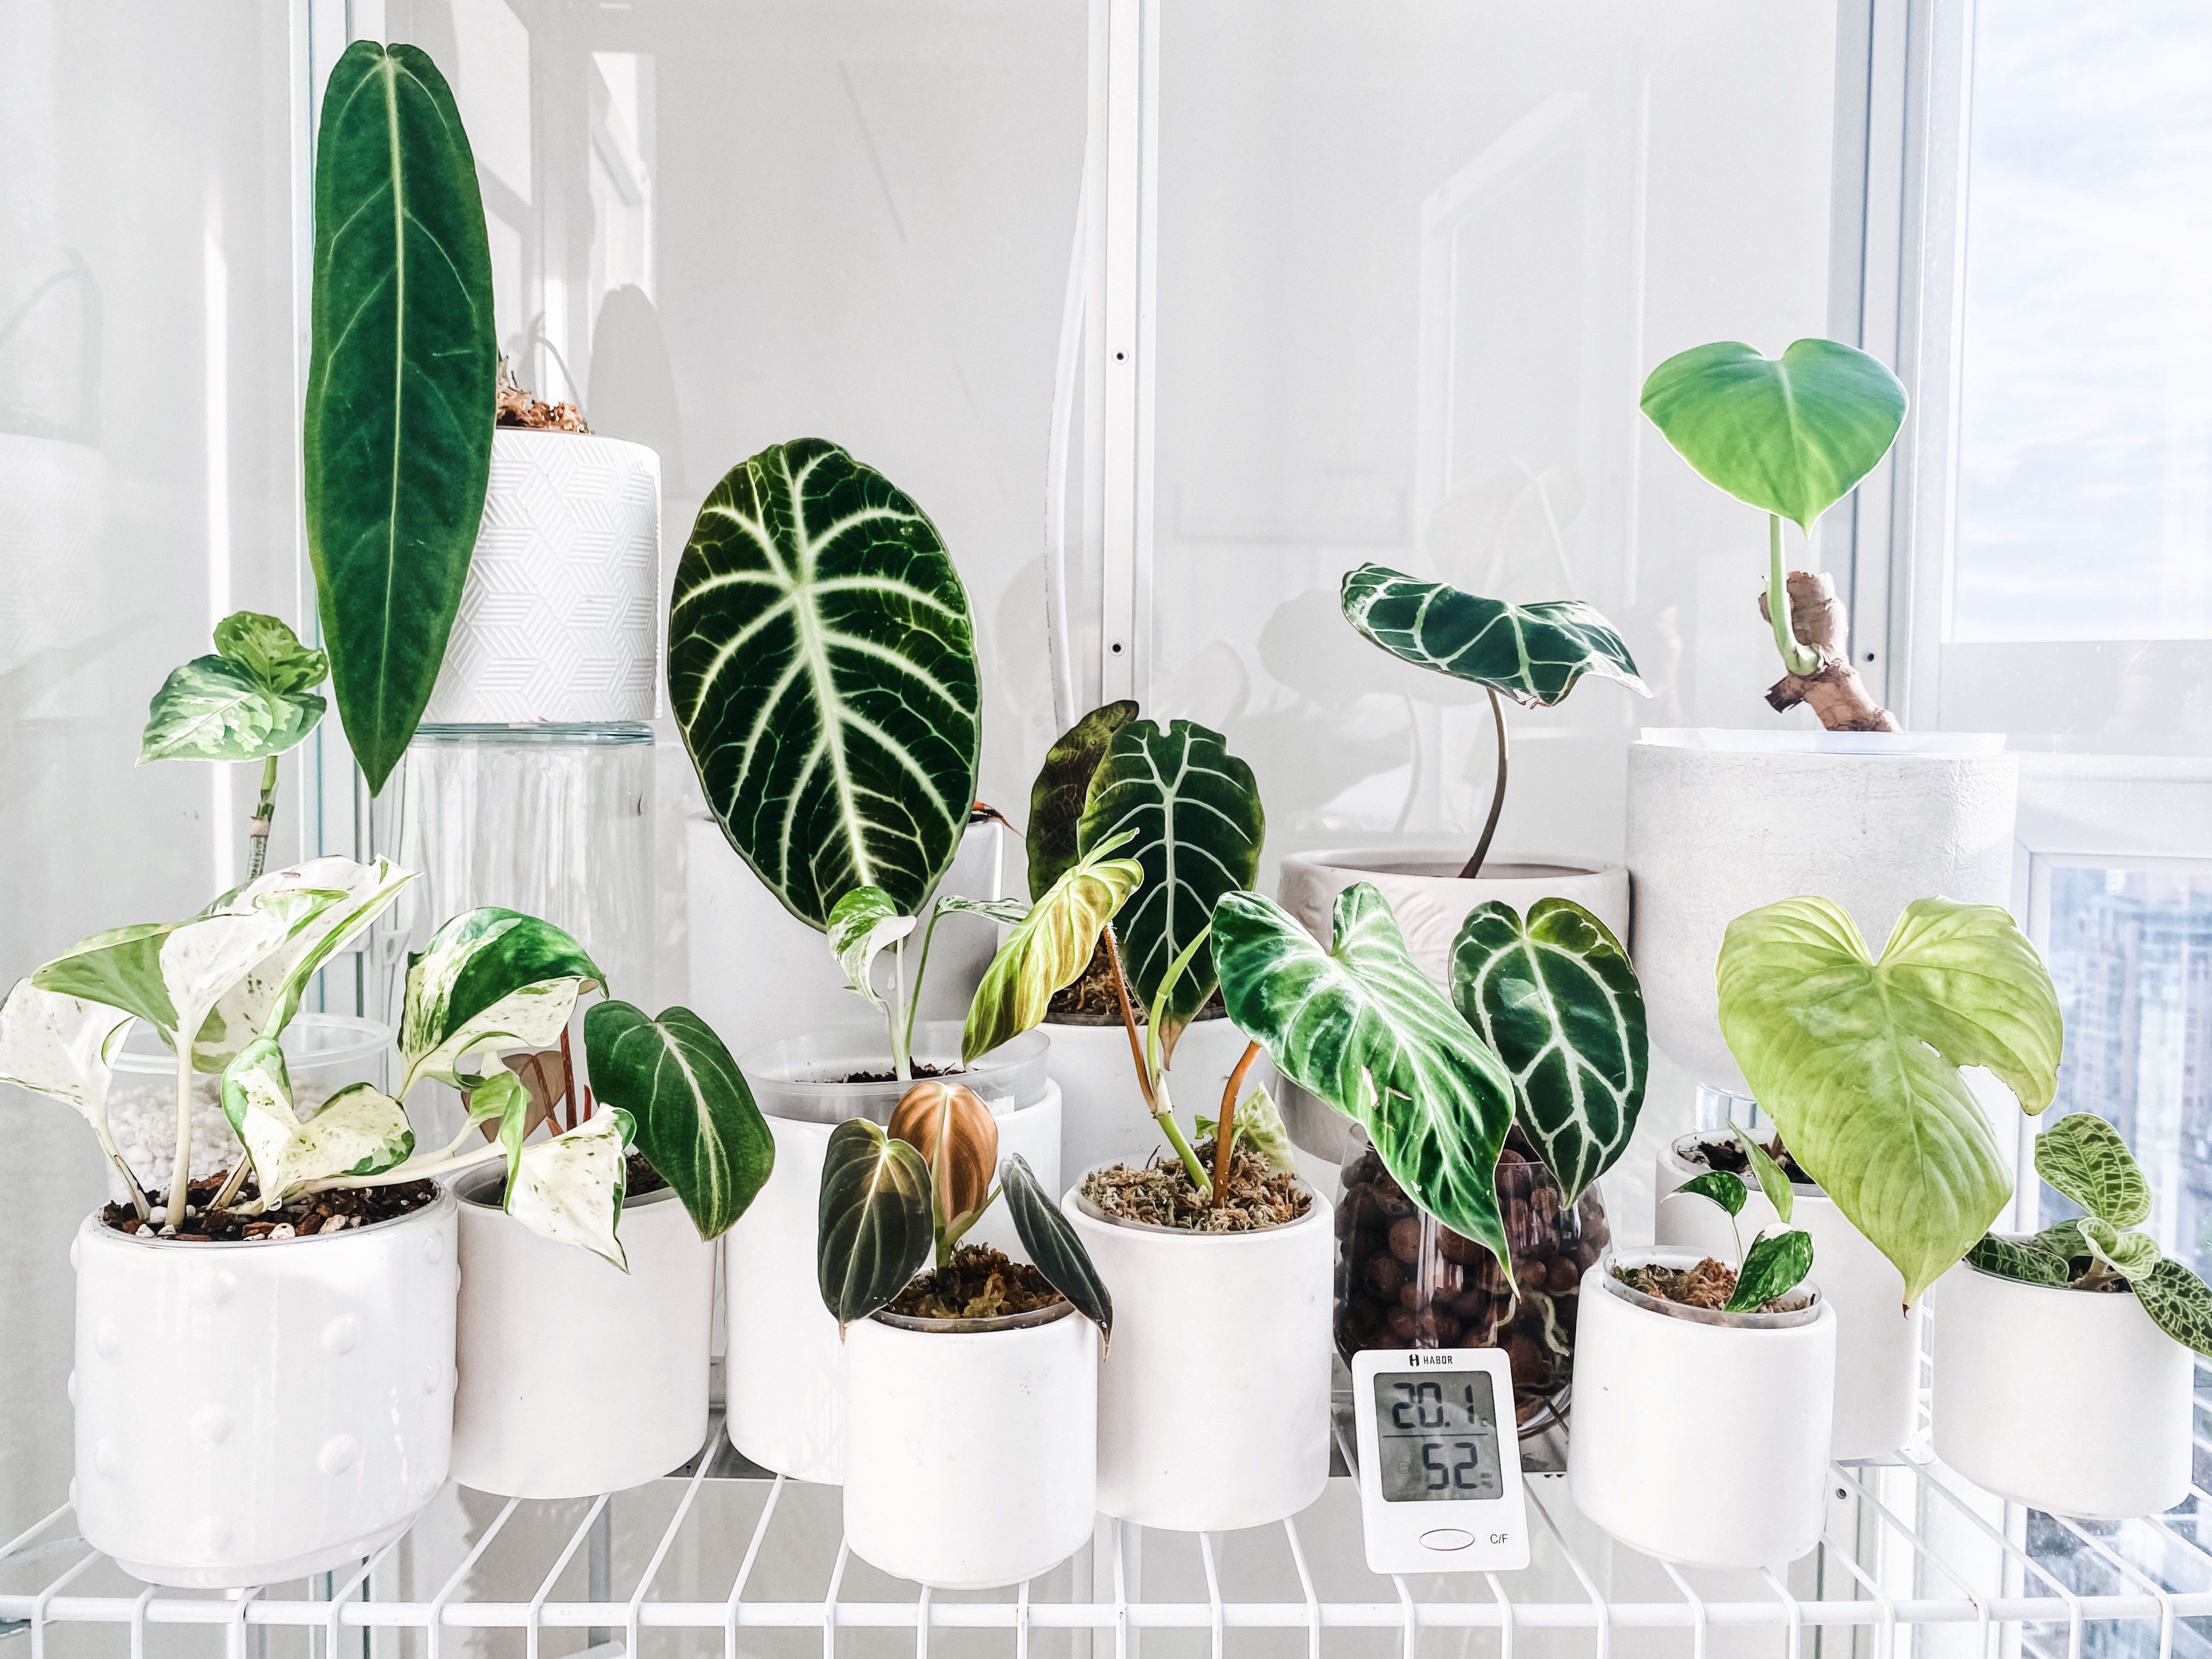 IKEA Greenhouse-Cabinet Hacks Are the Trend You Need to Know